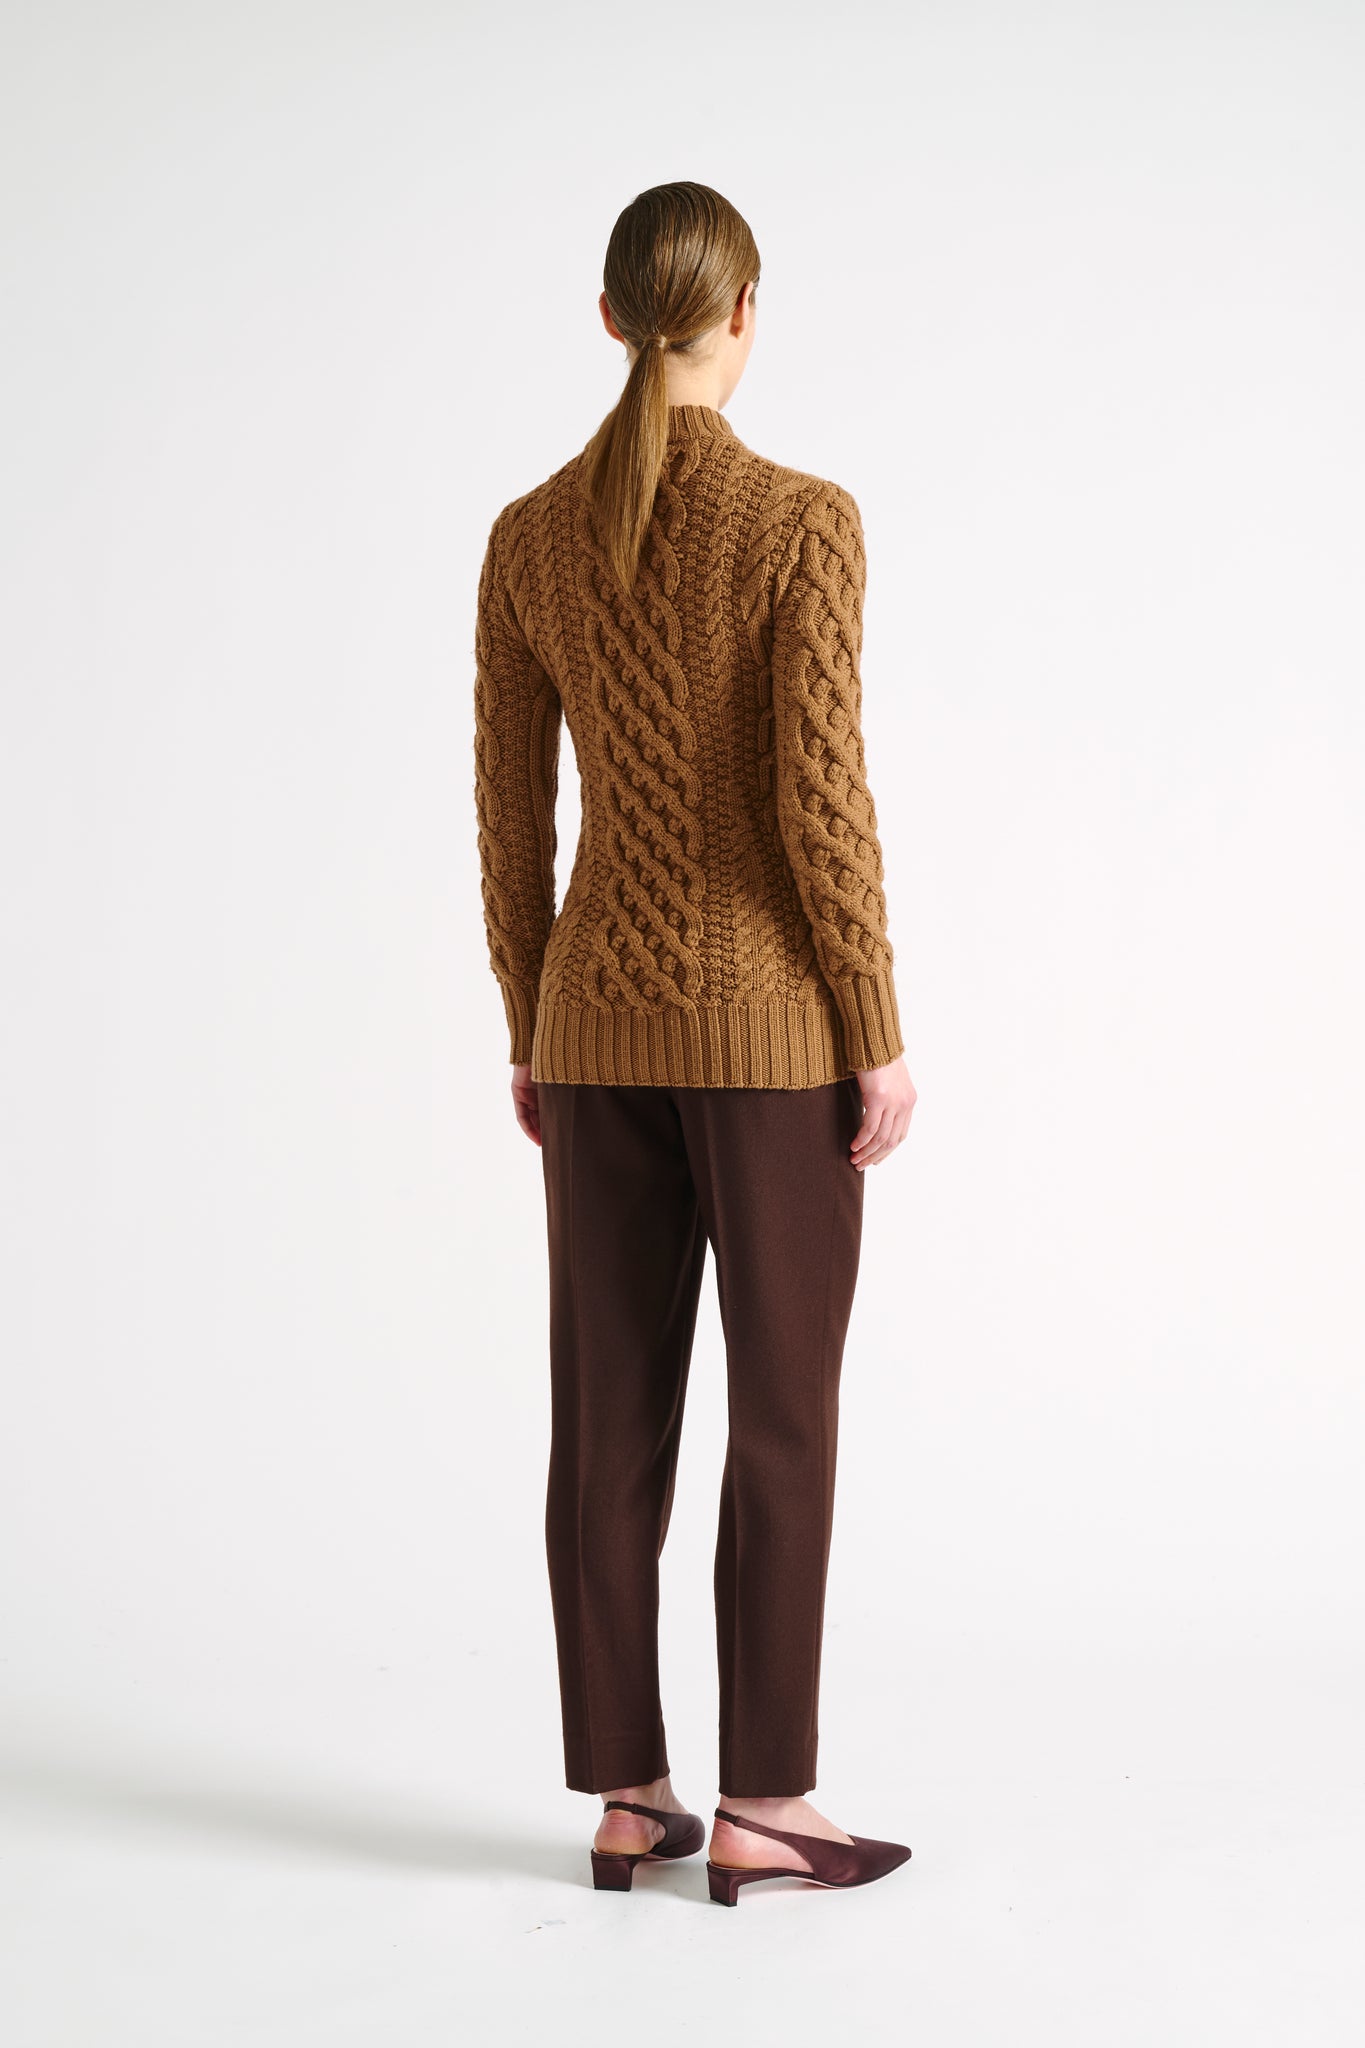 Emory Sweater | Tan Cable Knit Sweater | Emilia Wickstead